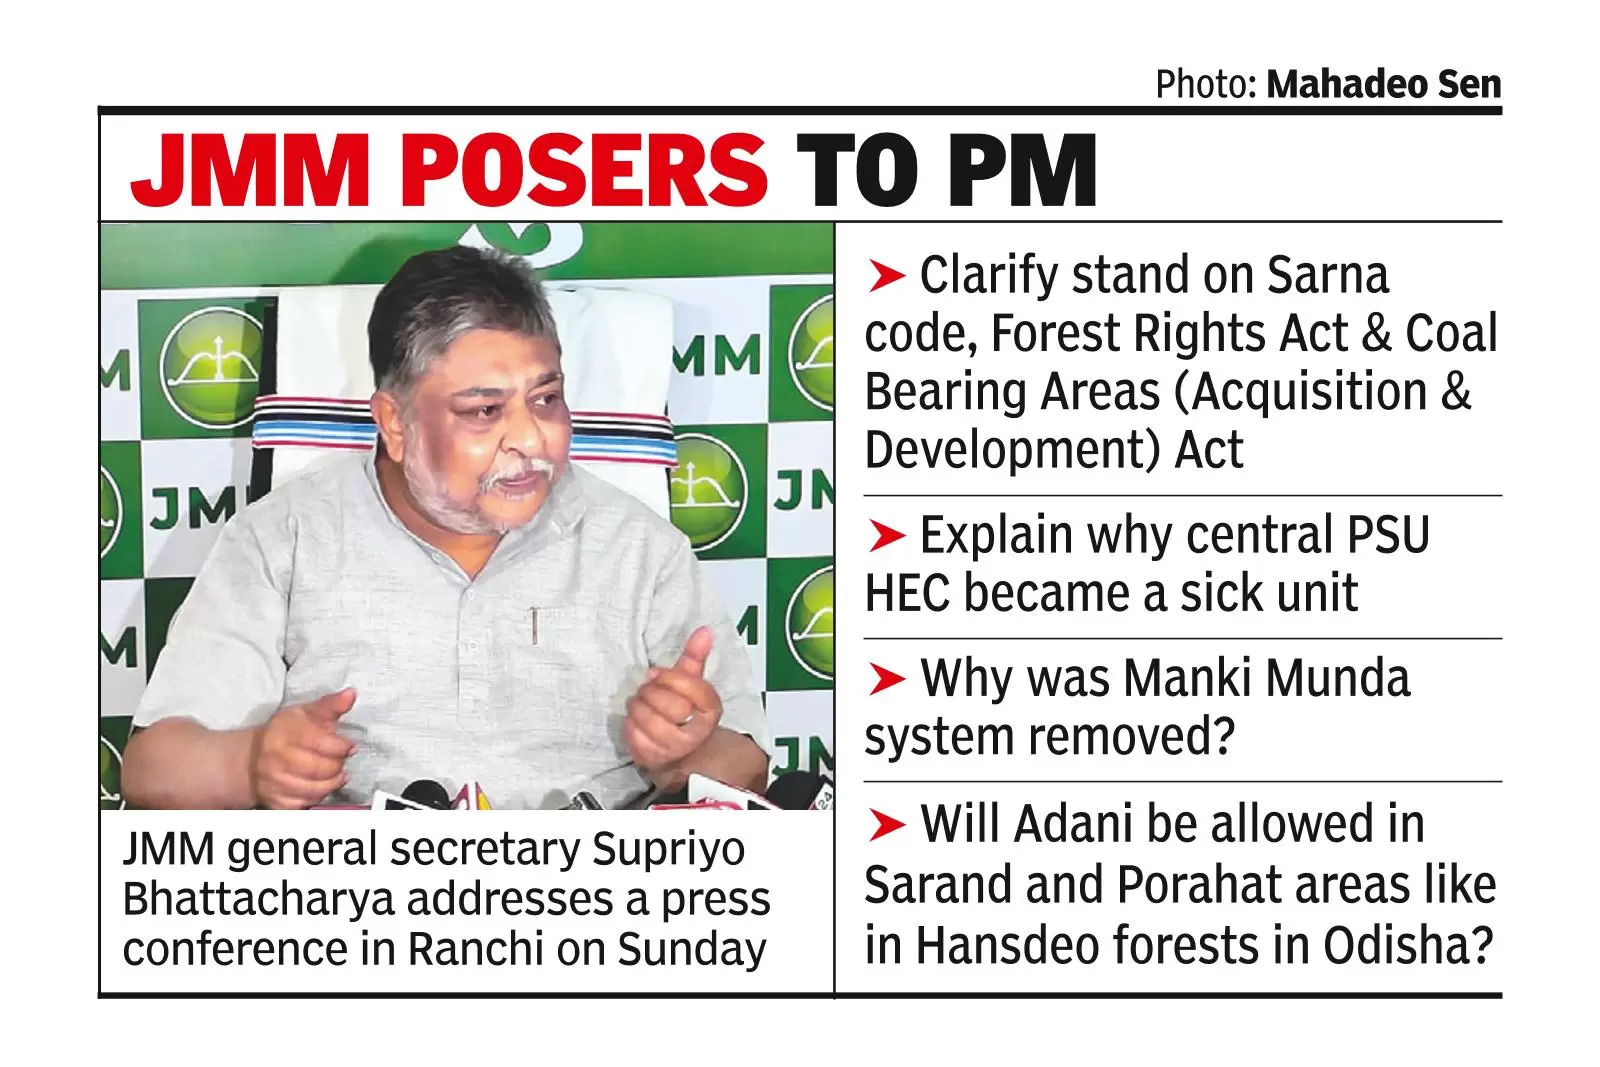 Want to know PM’s stand on Sarna, forest act: JMM